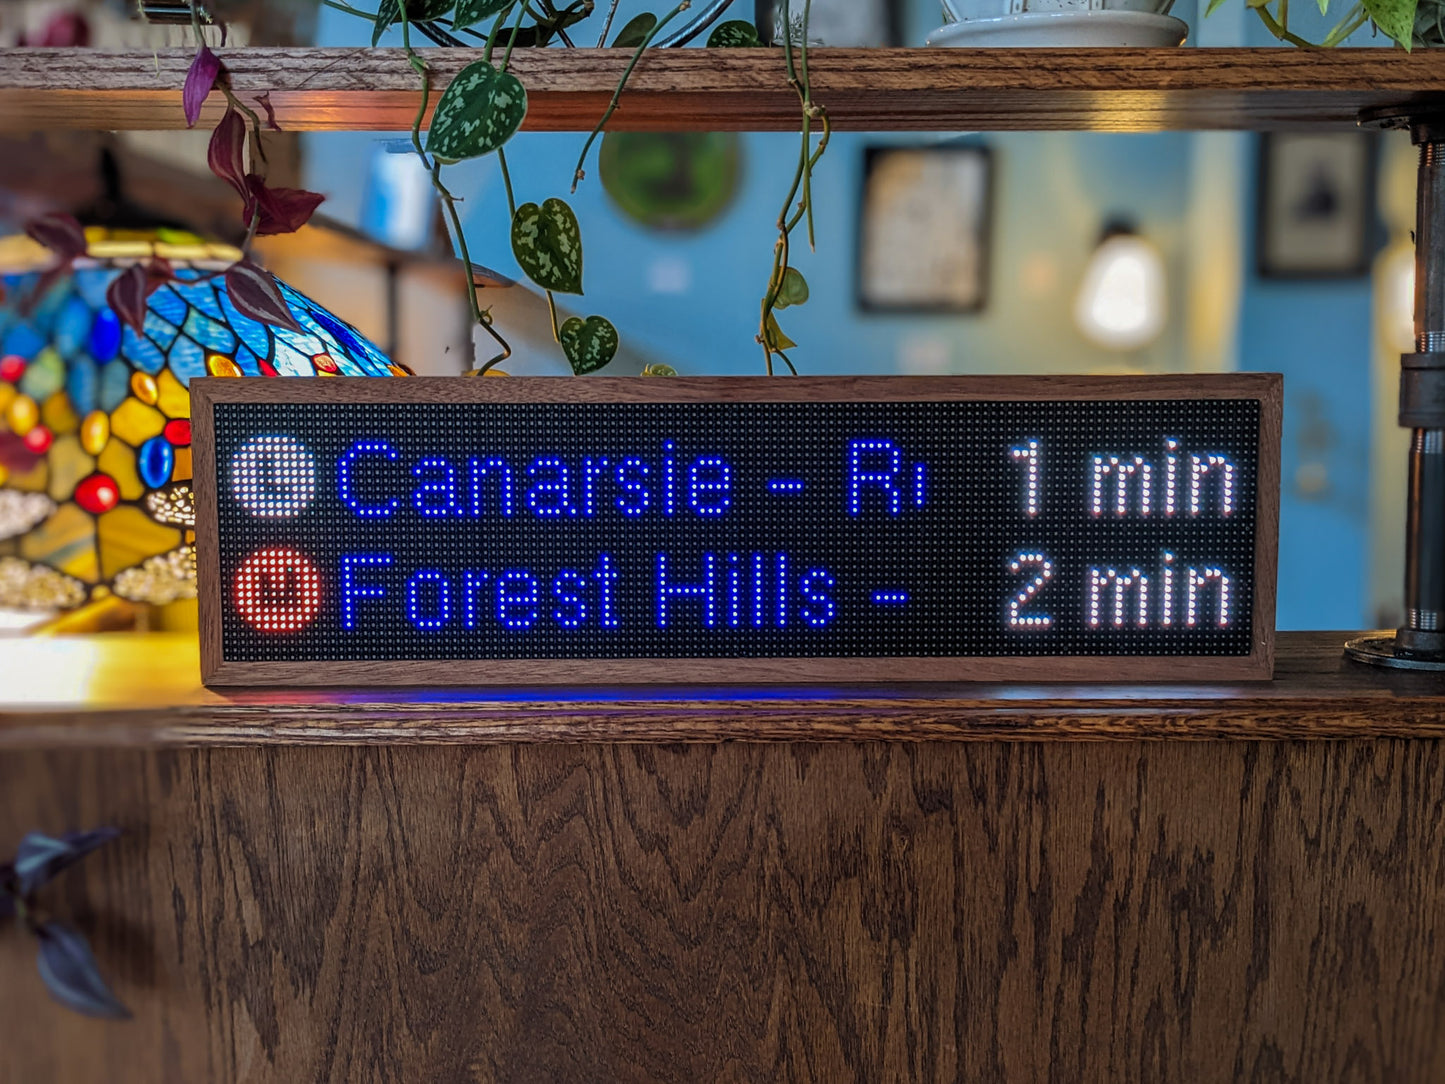 An NYC Subway Clock sits on a mahogany counter. A mahogany frame holds a black LED screen which reads, "L Canarsie- R 1 min" and directly below that on the screen "M Forest Hills- 2 min". A mahogany shelf sits above the clock and various plant vines drape artistically over the clock. A tiffany style lap is in the left back.